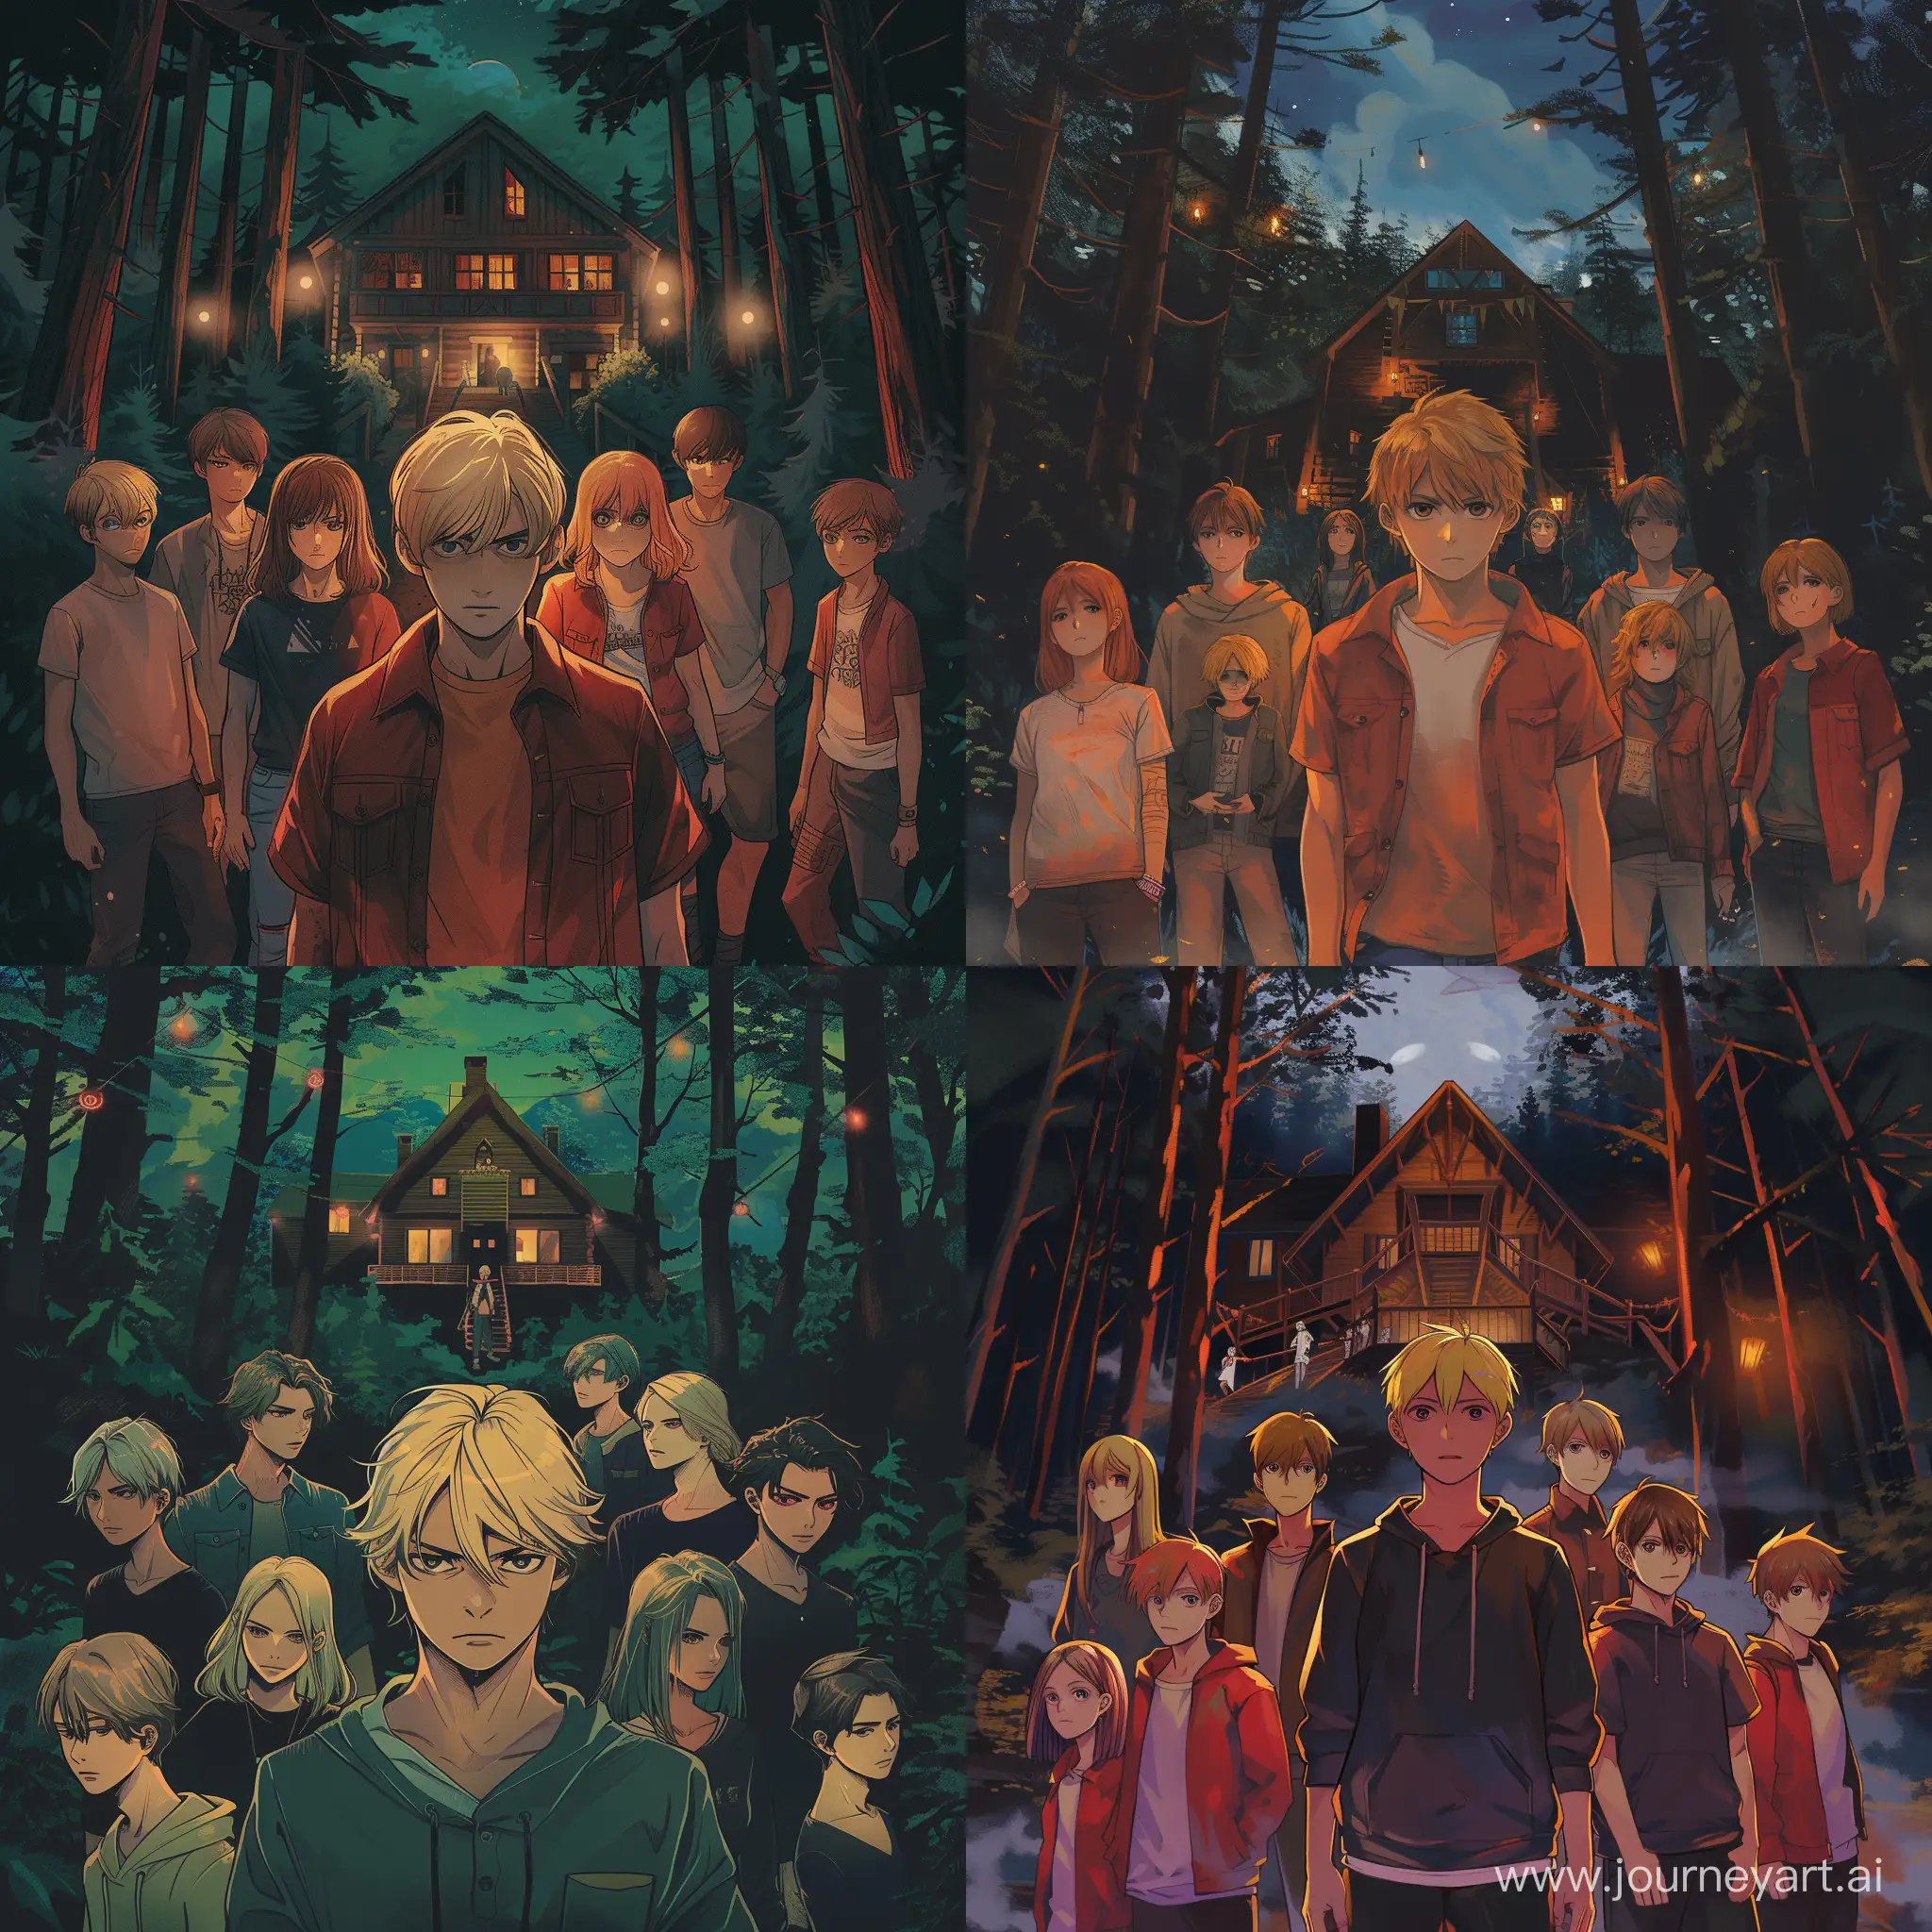 Enigmatic-Night-AnimeThemed-Horror-Book-Cover-with-11-Teenage-Friends-in-a-Forest-Lodge